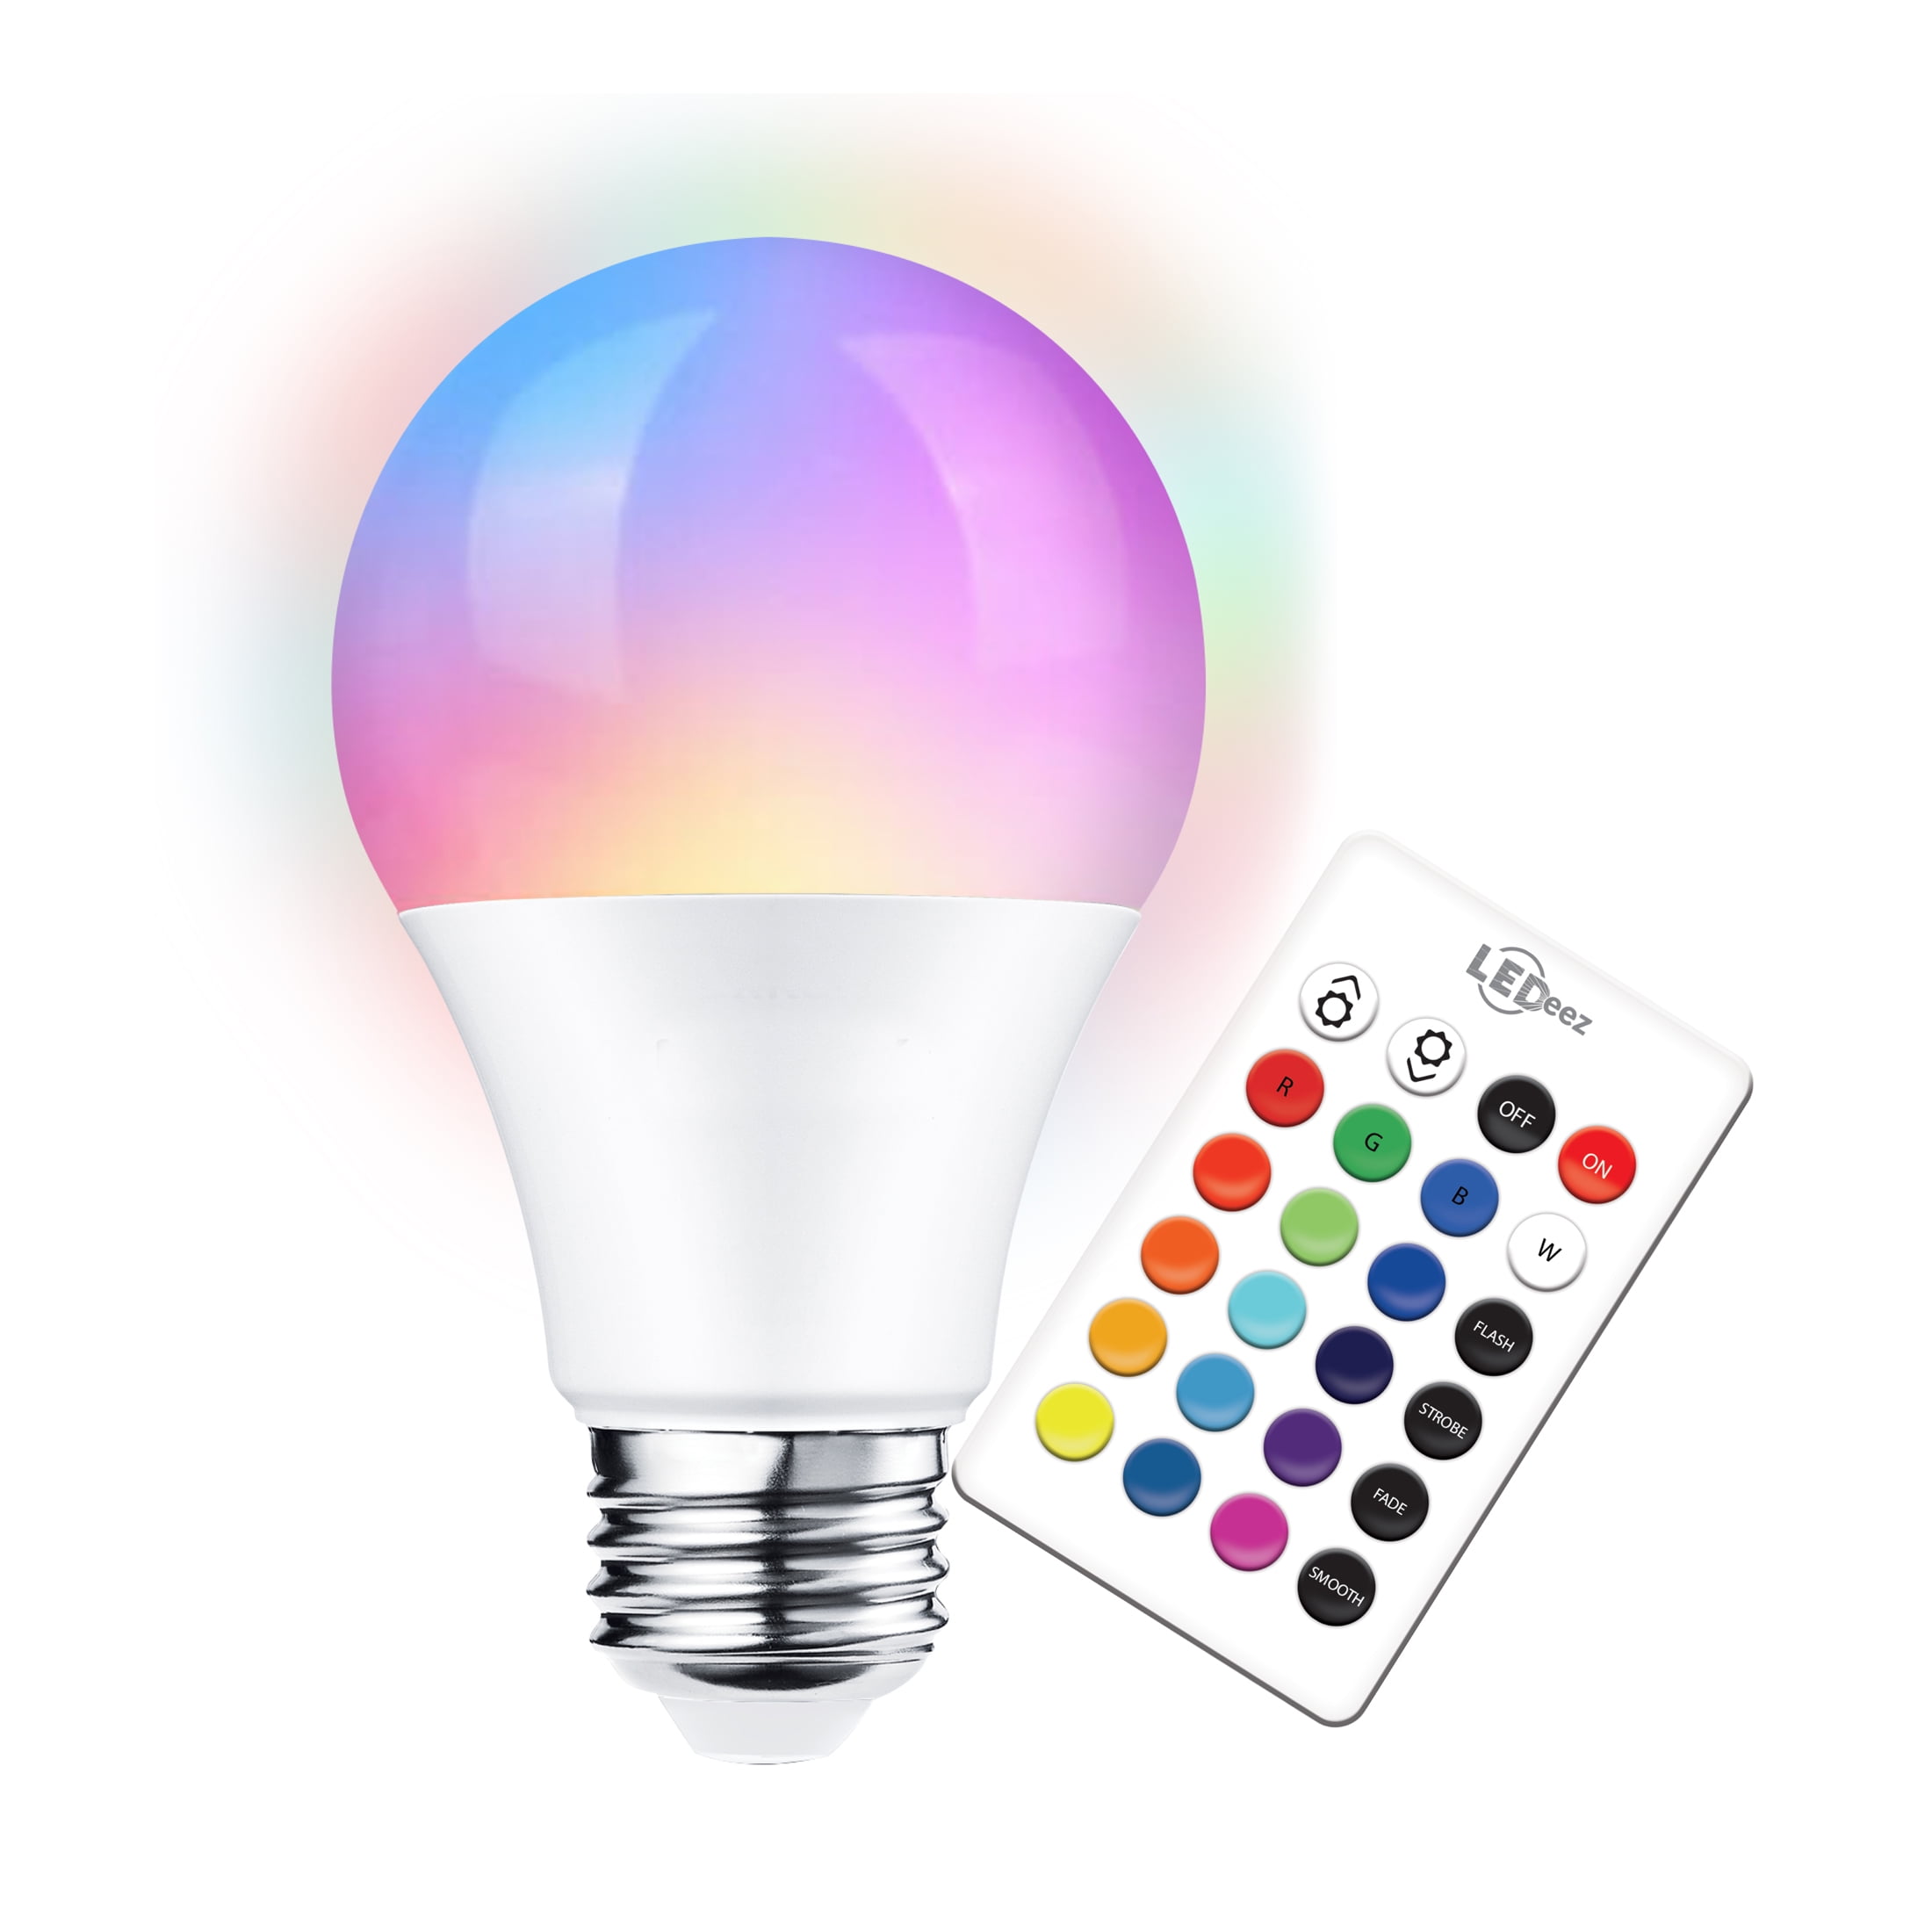 How To Change The Color Of A Light Bulb Ledeez LED Light Bulb, Color Changing, 16 Colors, Dimmable, 4 Modes, 6W,  Remote Control Included, Multicolor, LED Lights for Bedroom - Walmart.com